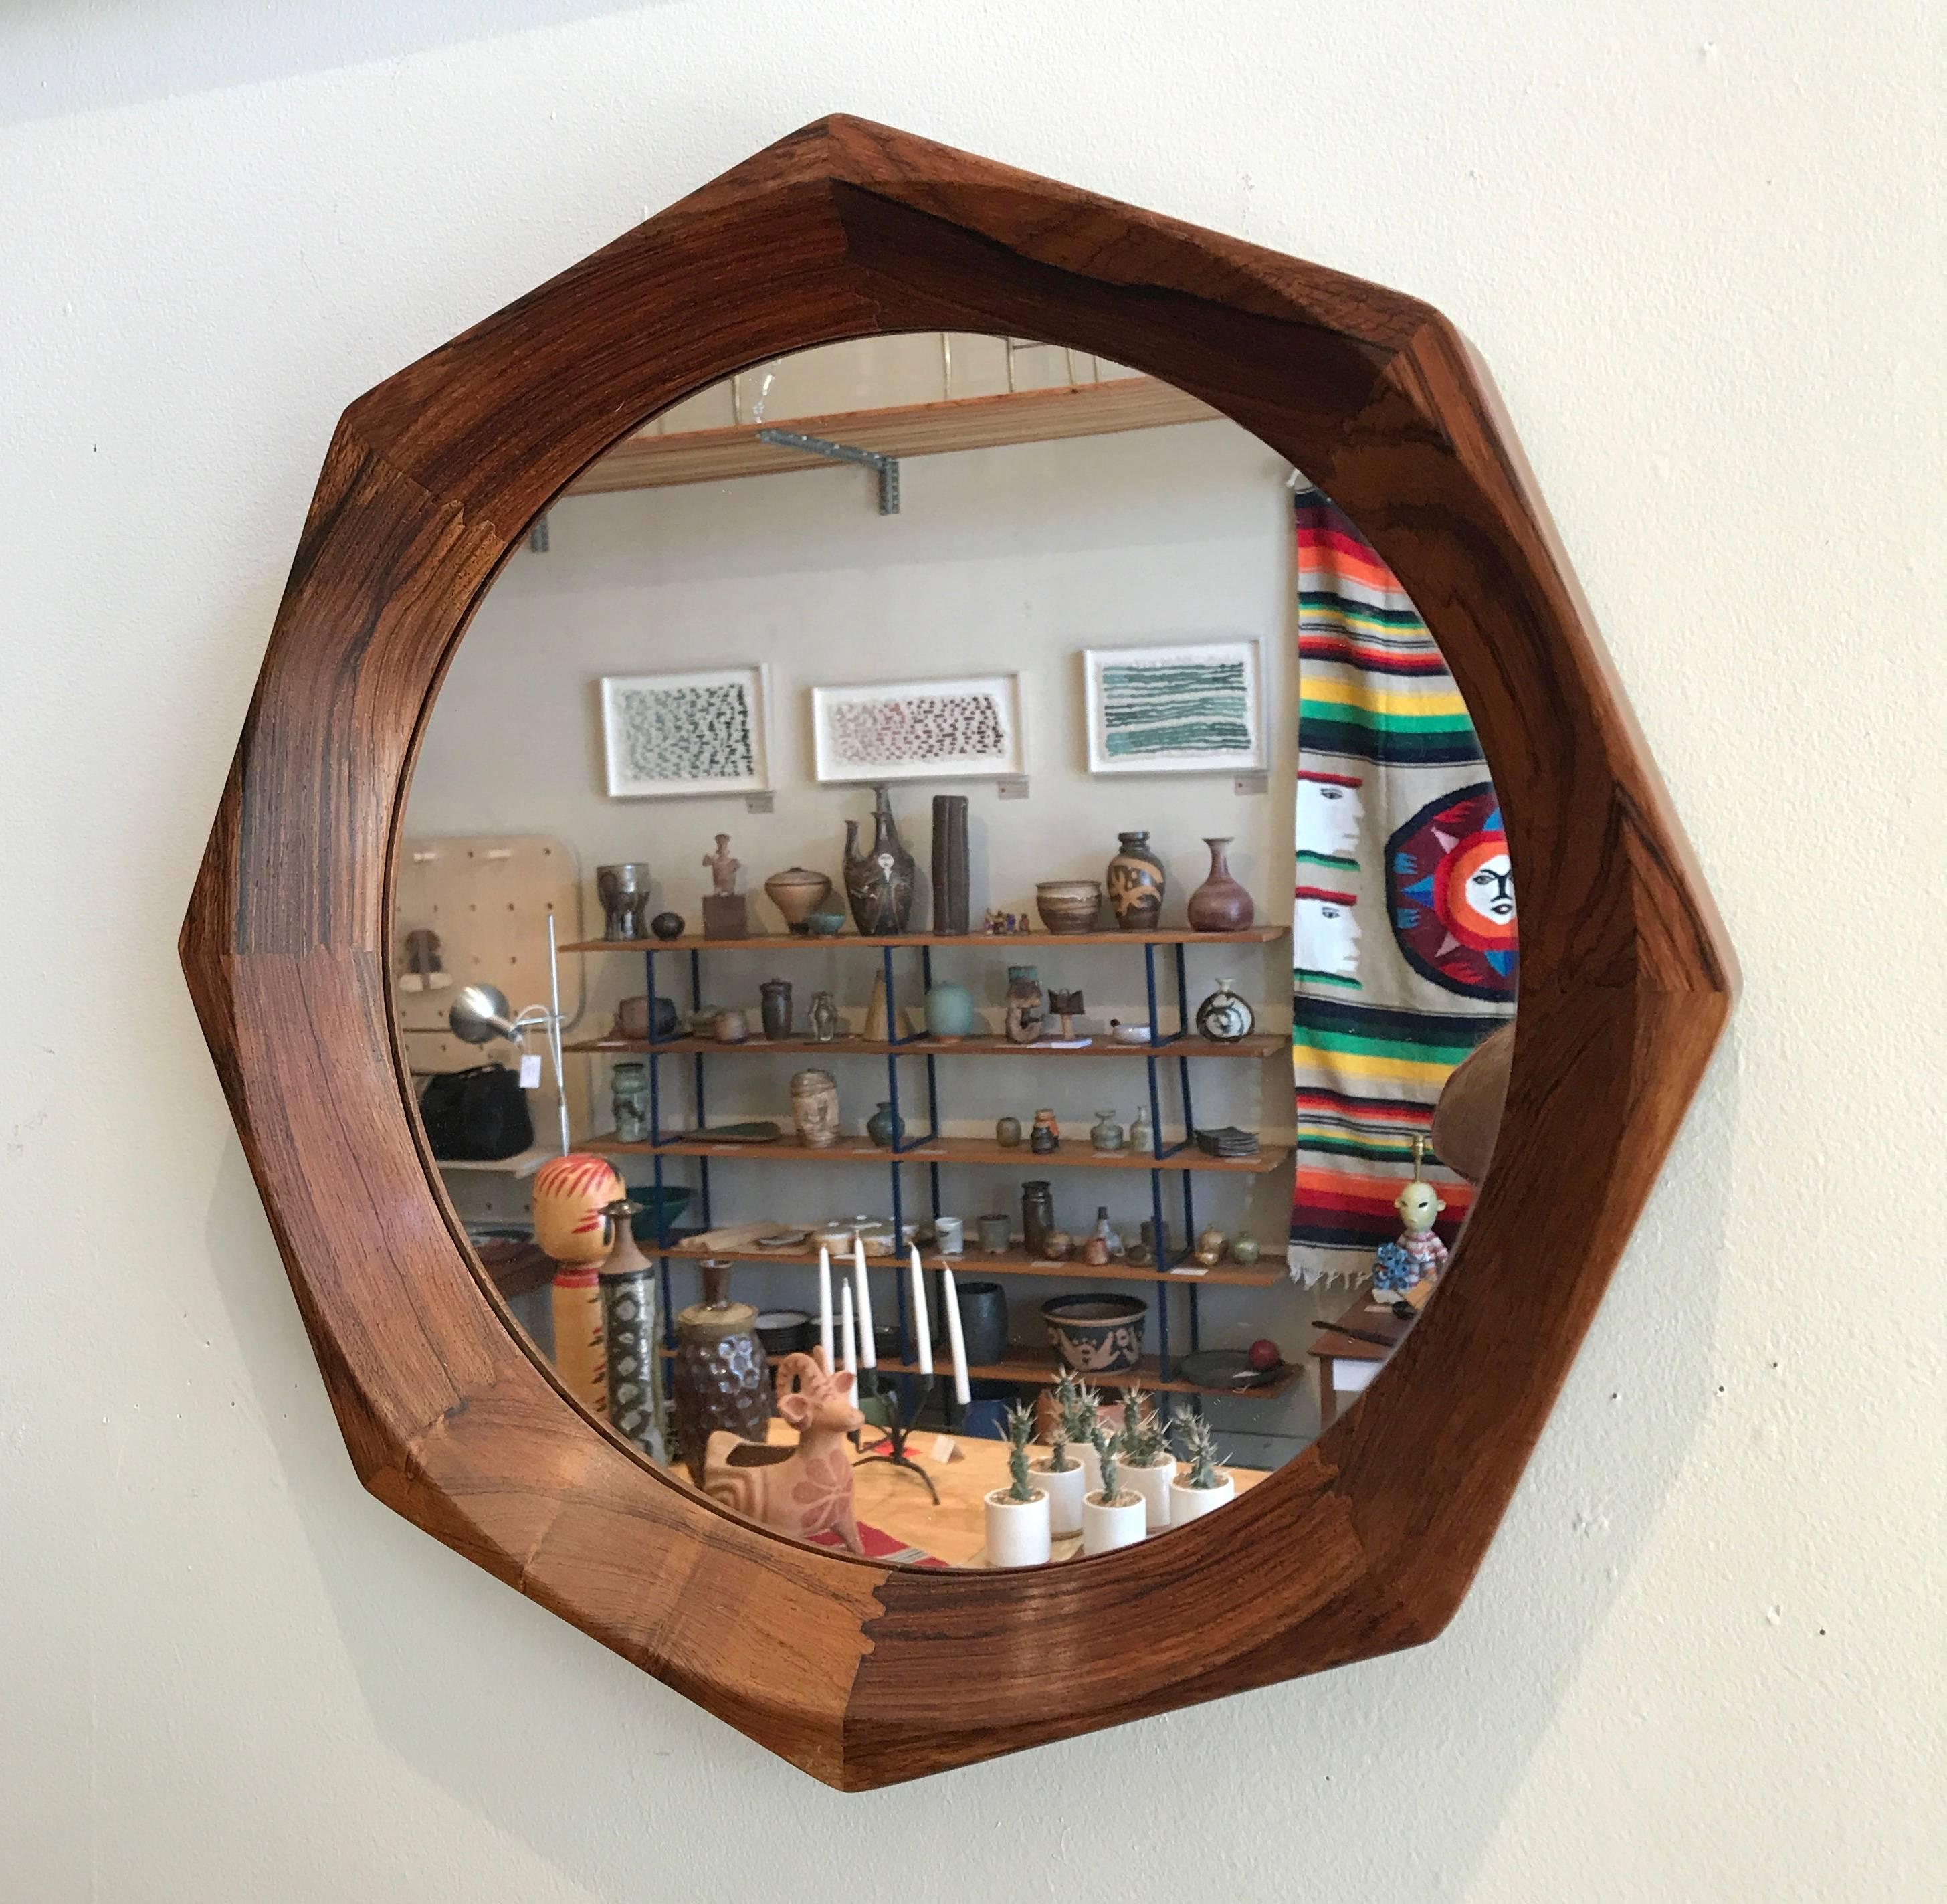 Solid rosewood framed Danish octagon wall mirror from the 1960s, beautiful construction with unique joinery. In great vintage condition with expressive graining to the wood.